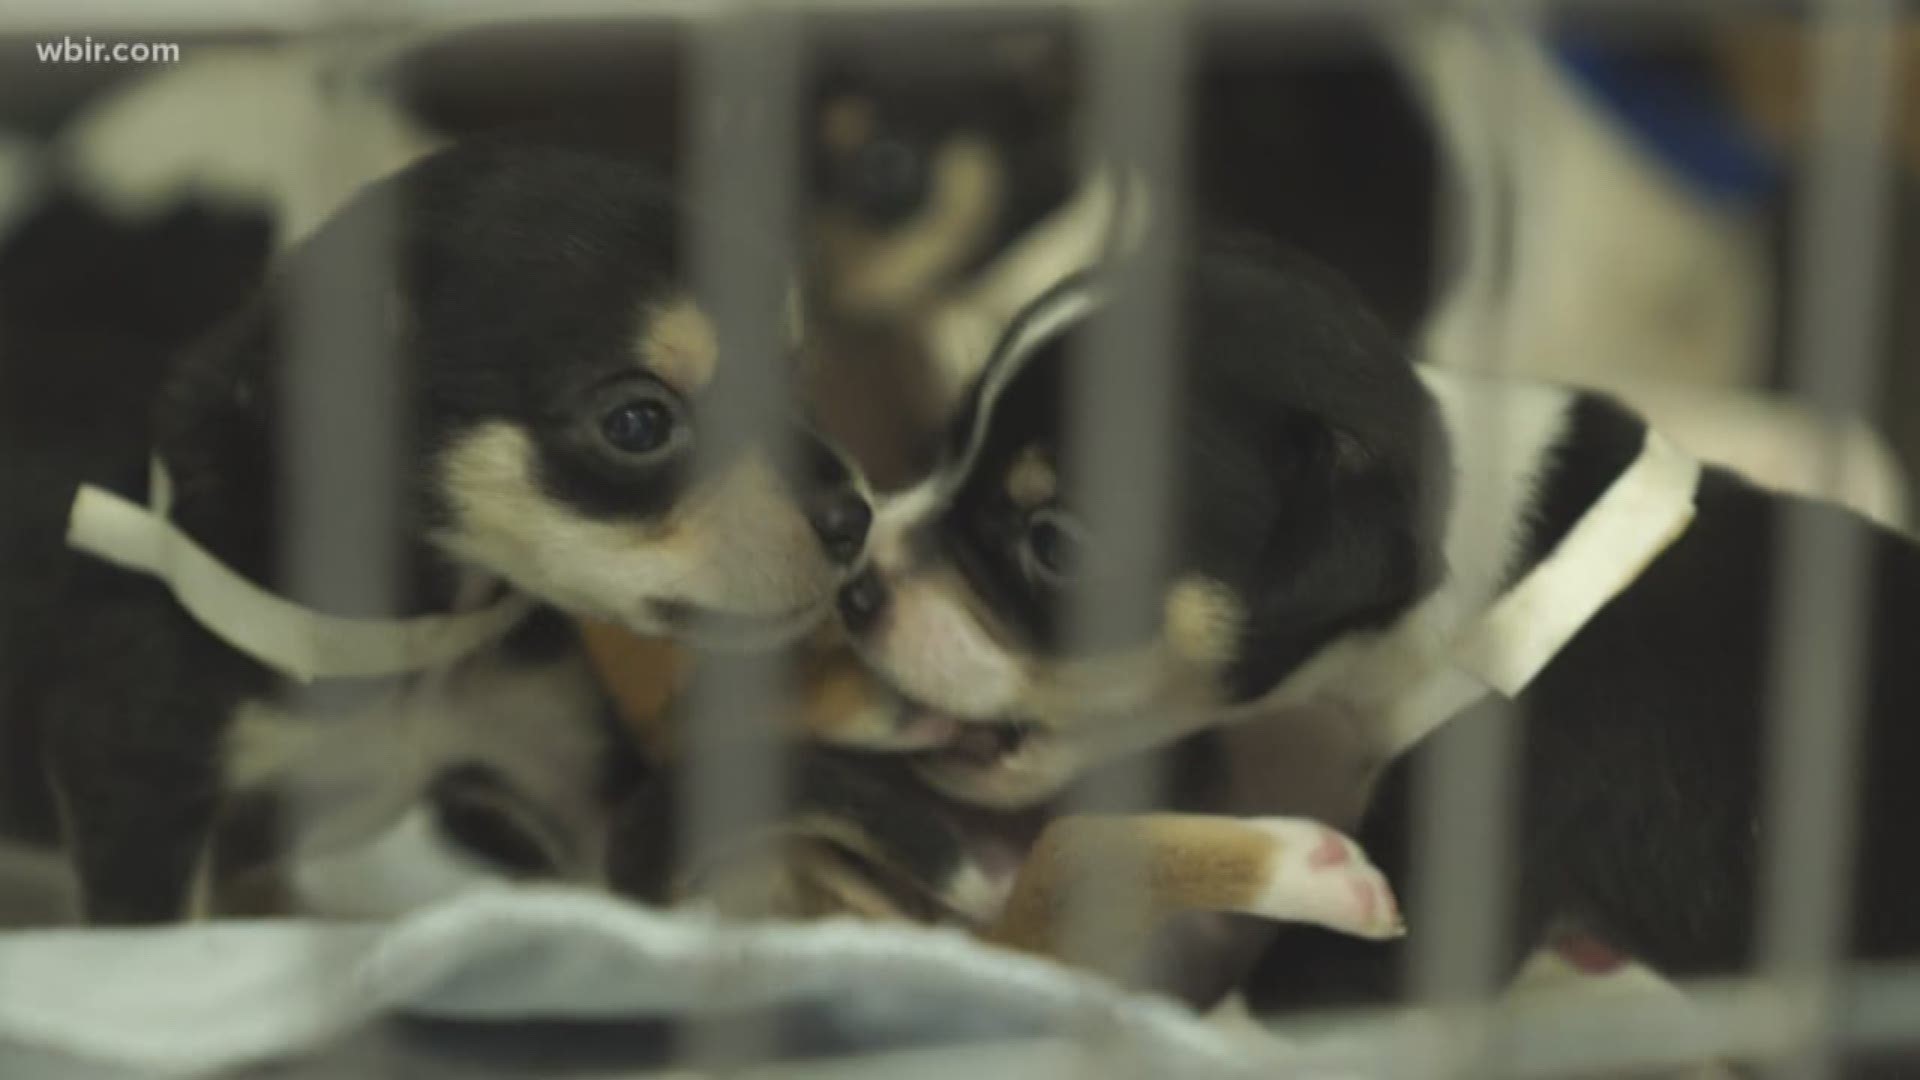 The Union County Sheriff's Office says a pair is accused of hoarding 84 dogs in a Maynardville home.